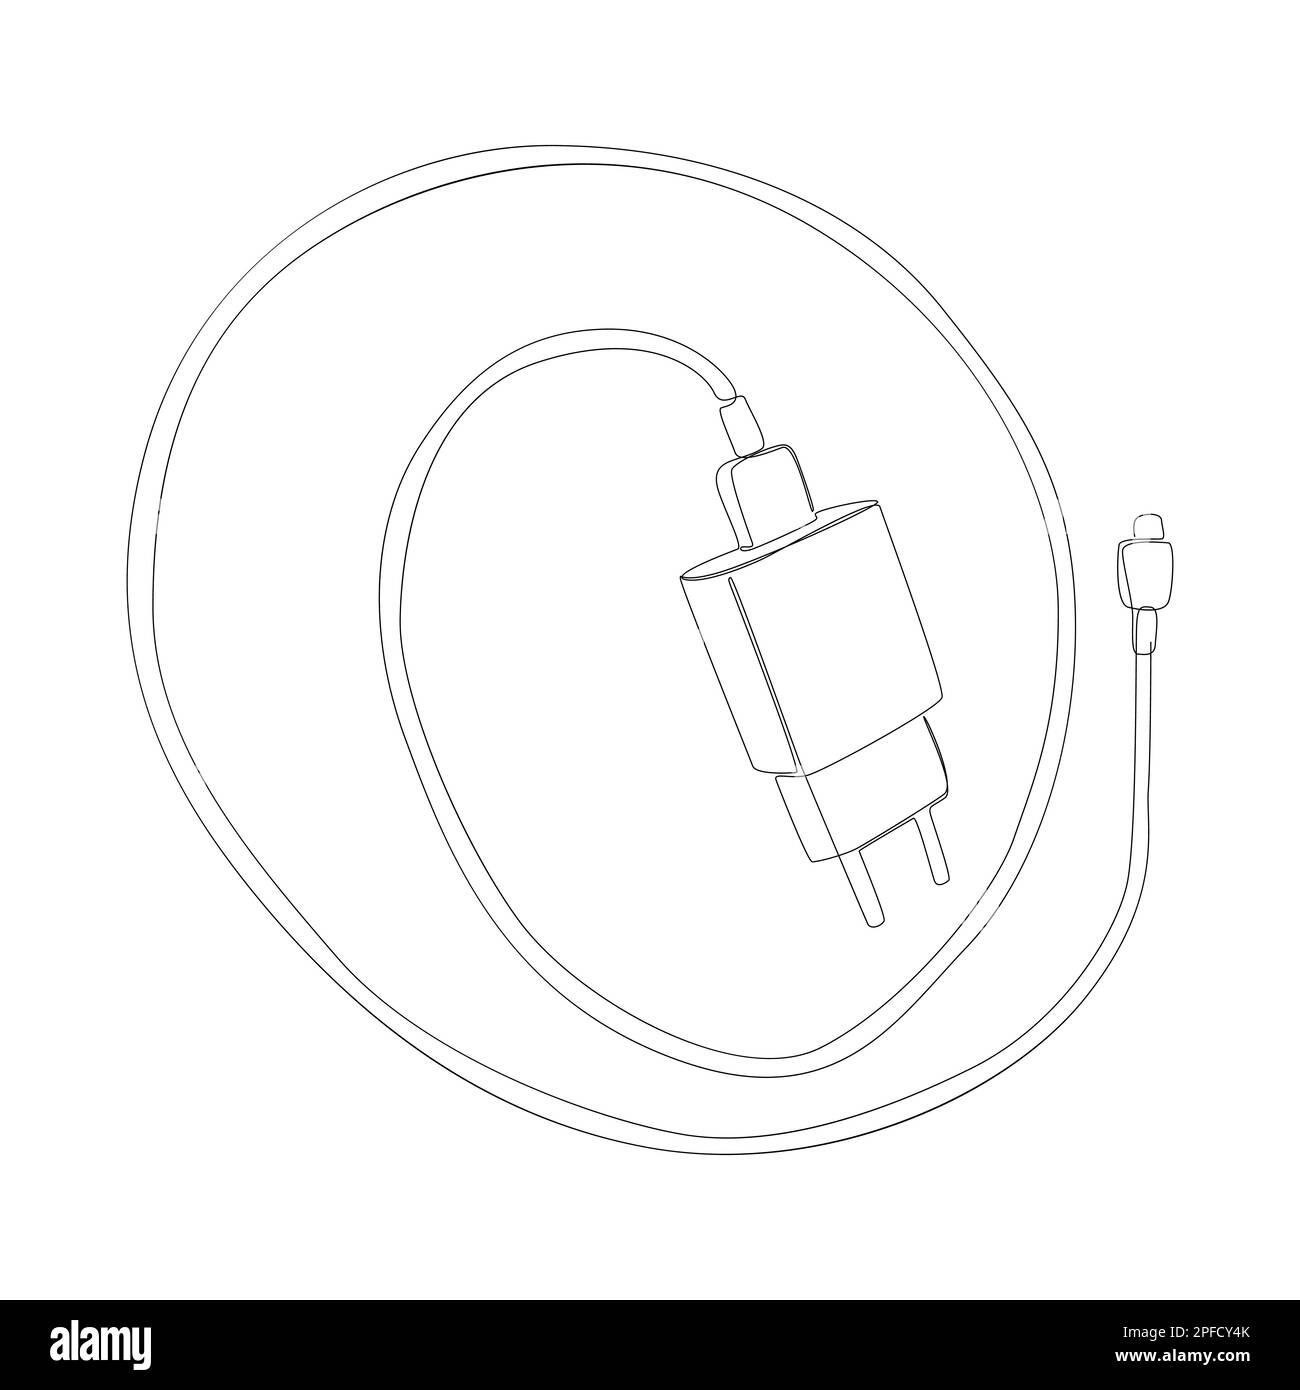 One continuous line of Smart phone charger. Thin Line Illustration vector concept. Contour Drawing Creative ideas. Stock Vector